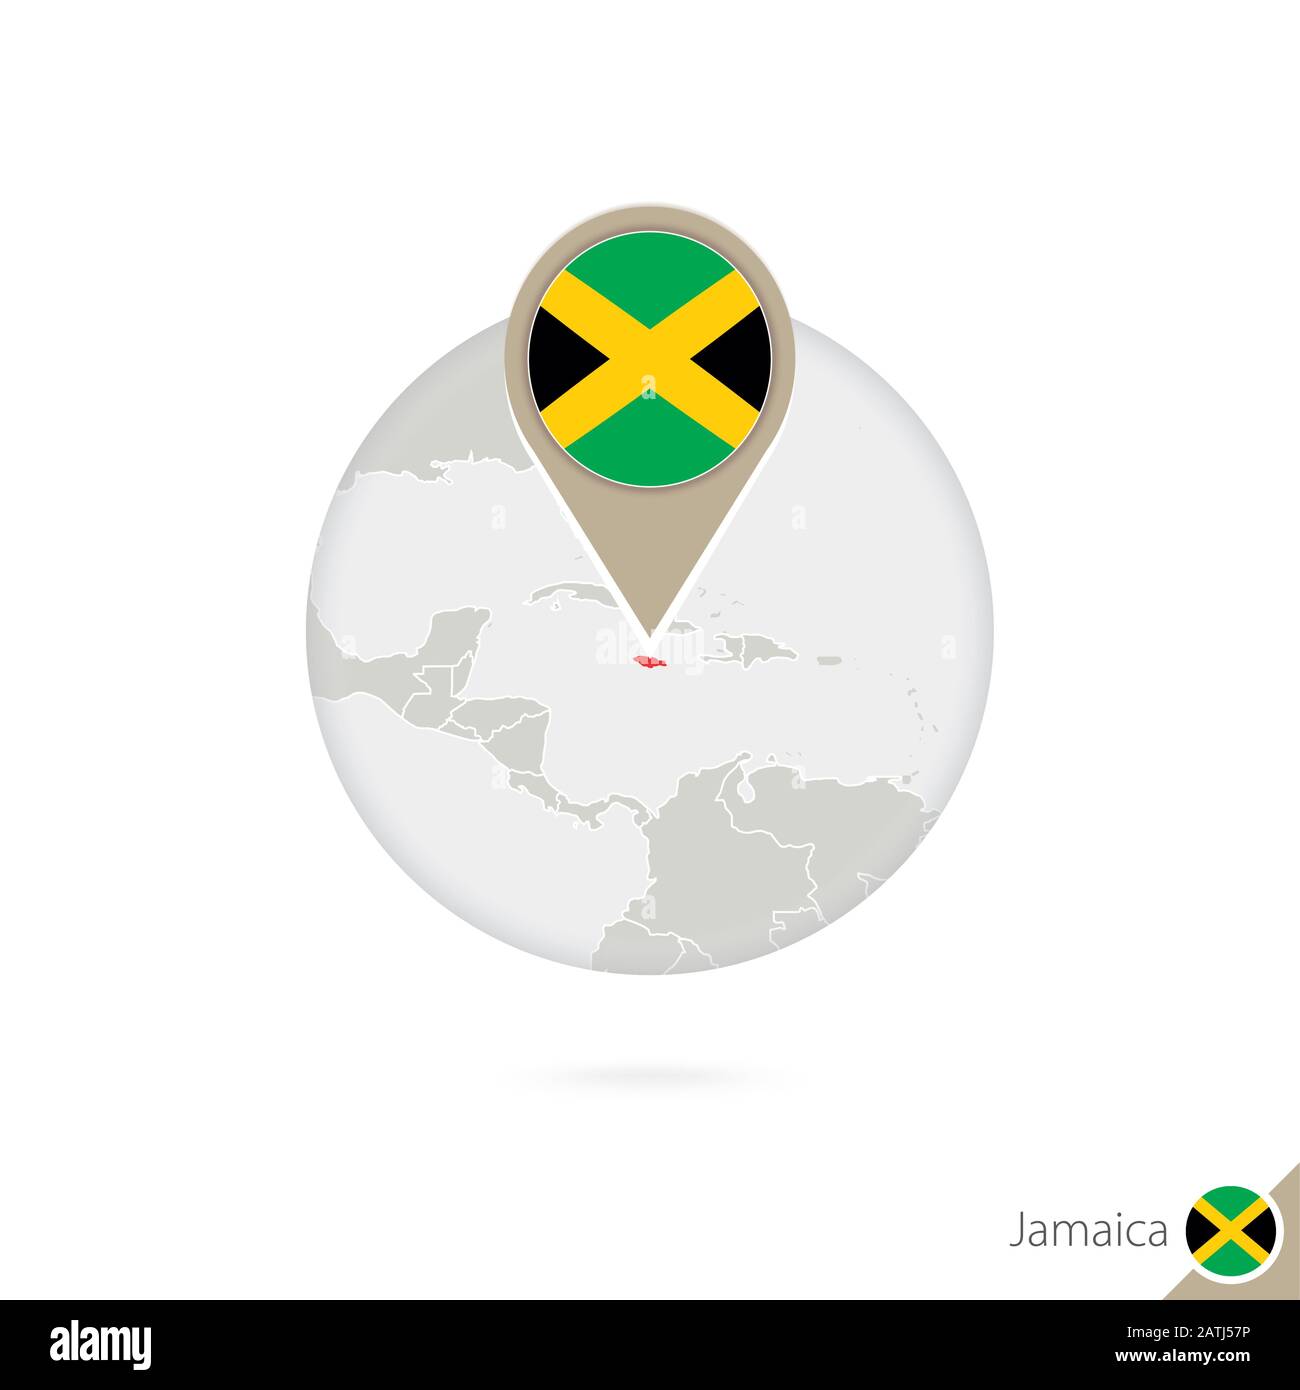 Jamaica map and flag in circle. Map of Jamaica, Jamaica flag pin. Map of Jamaica in the style of the globe. Vector Illustration. Stock Vector